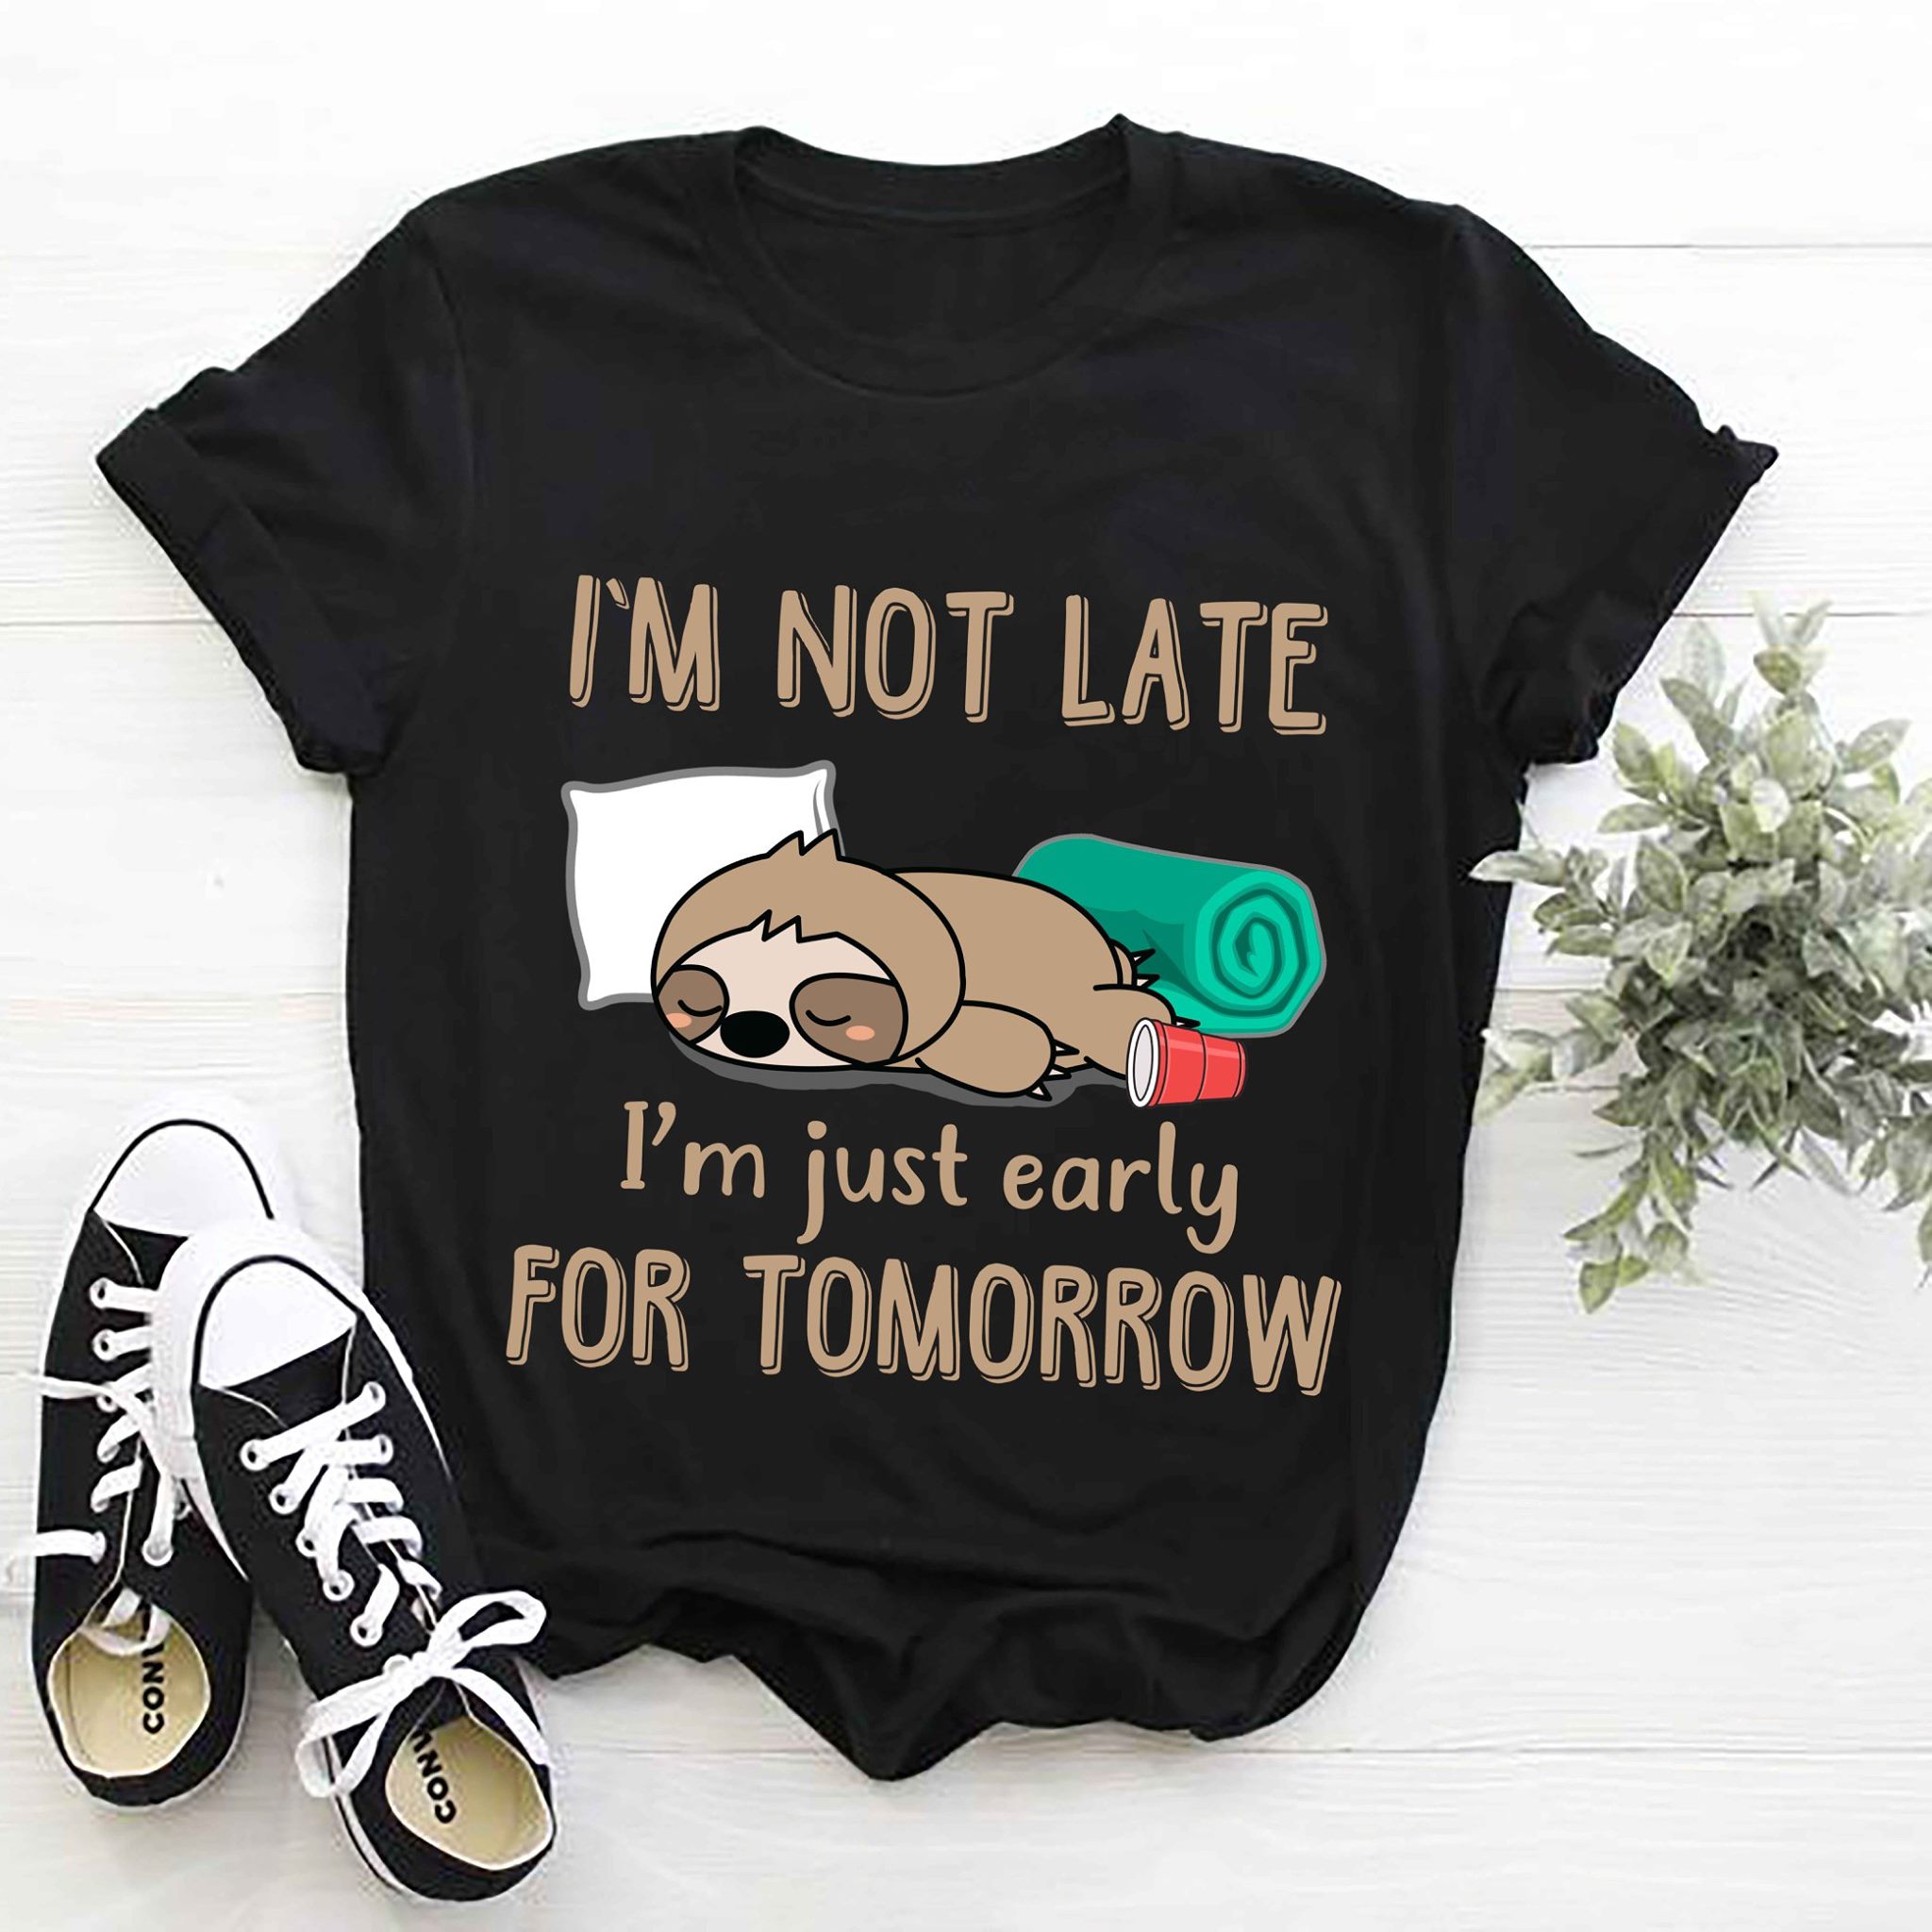 I'm not lane I'm just early for tomorrow - Sleeping sloth